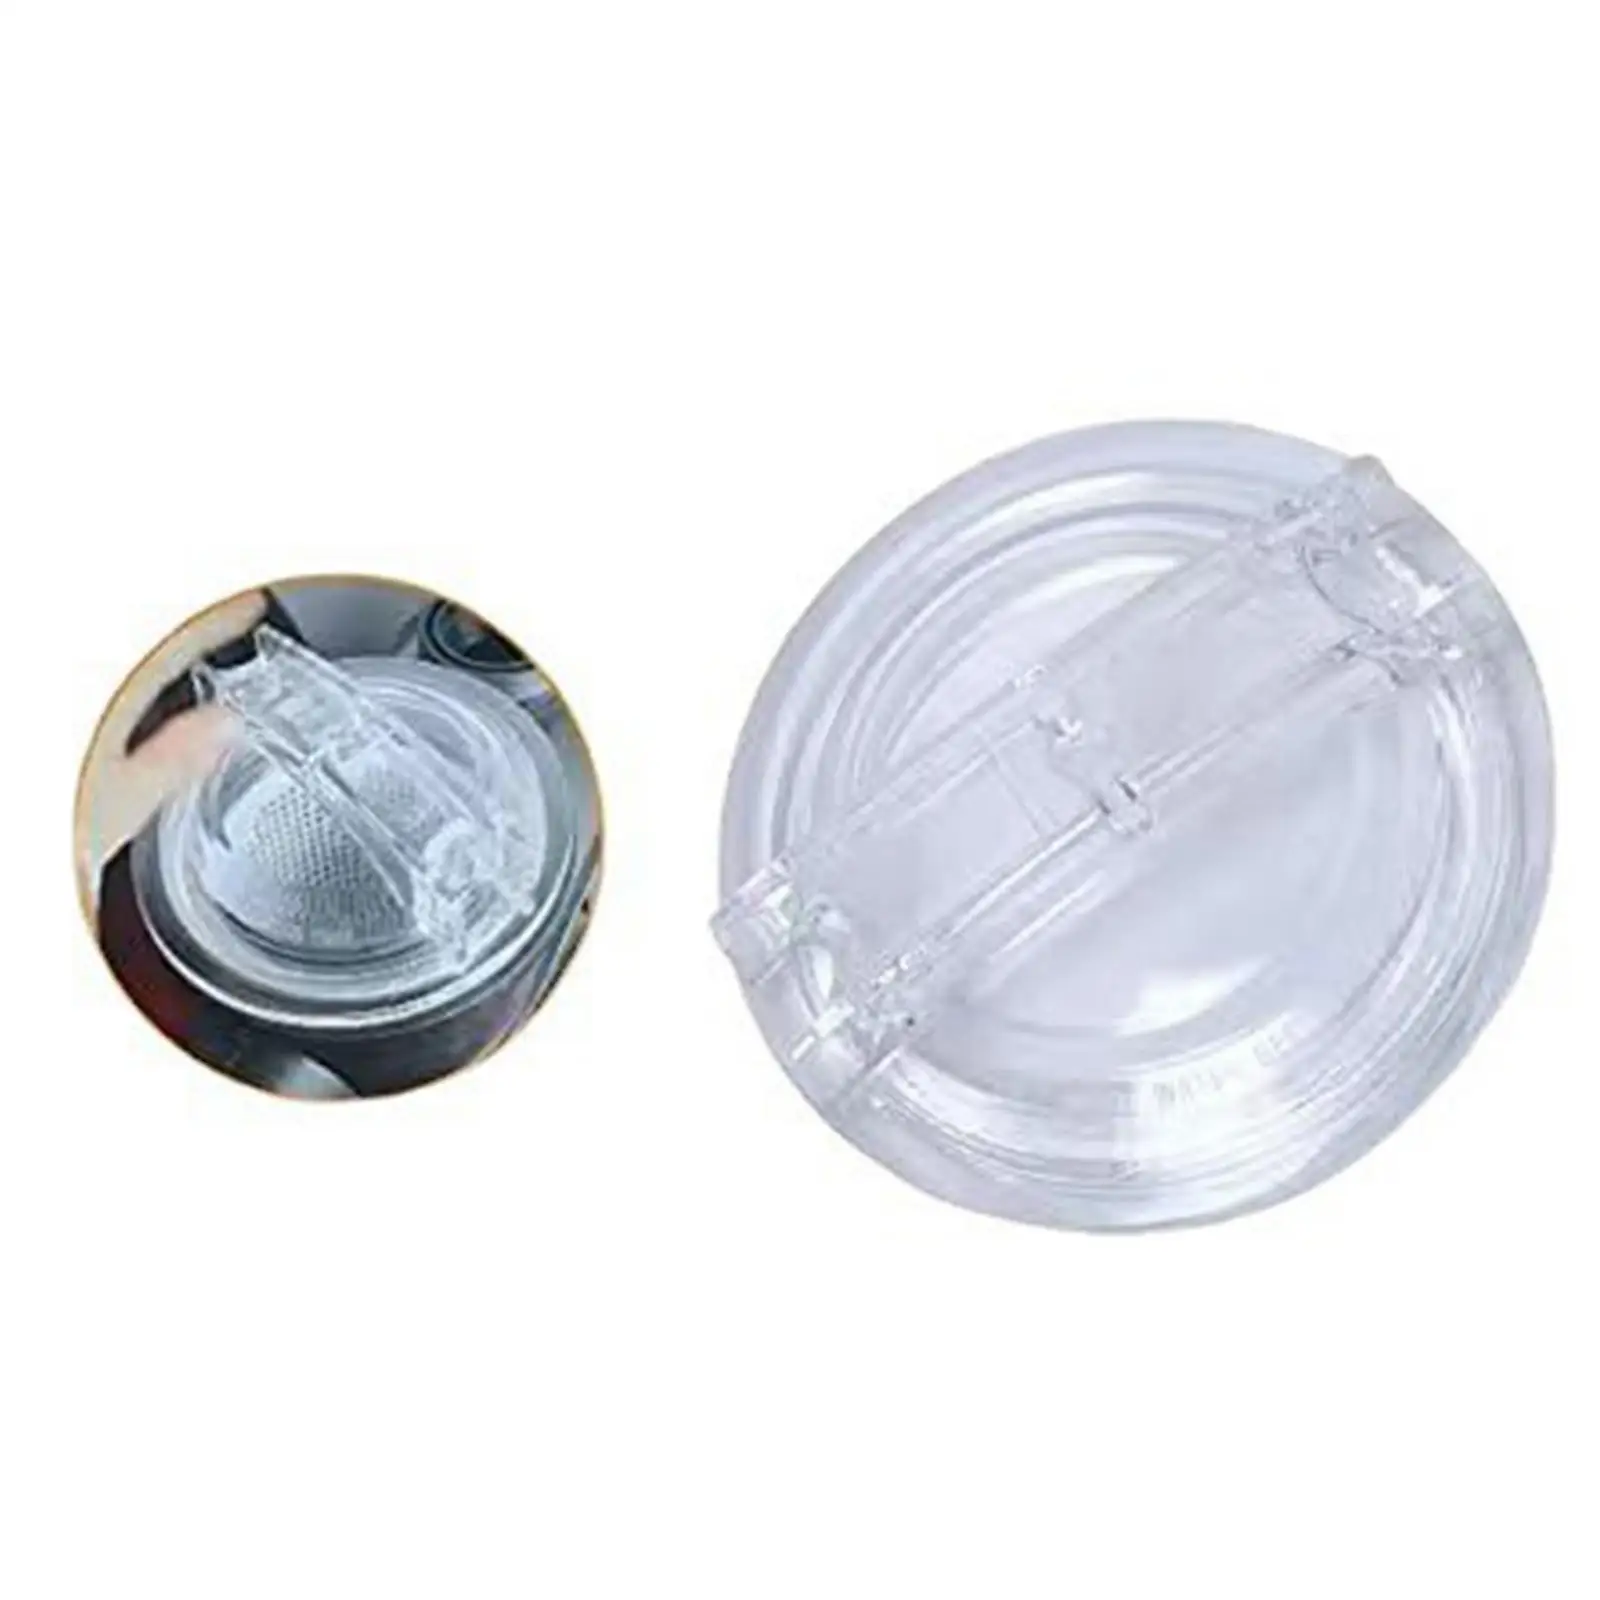 Threaded Strainer Lid Cover Pool Pump Accessory Universal 5.24``inner Pool Pump Sand Filter Strainer Cover for SP3020 SP3010